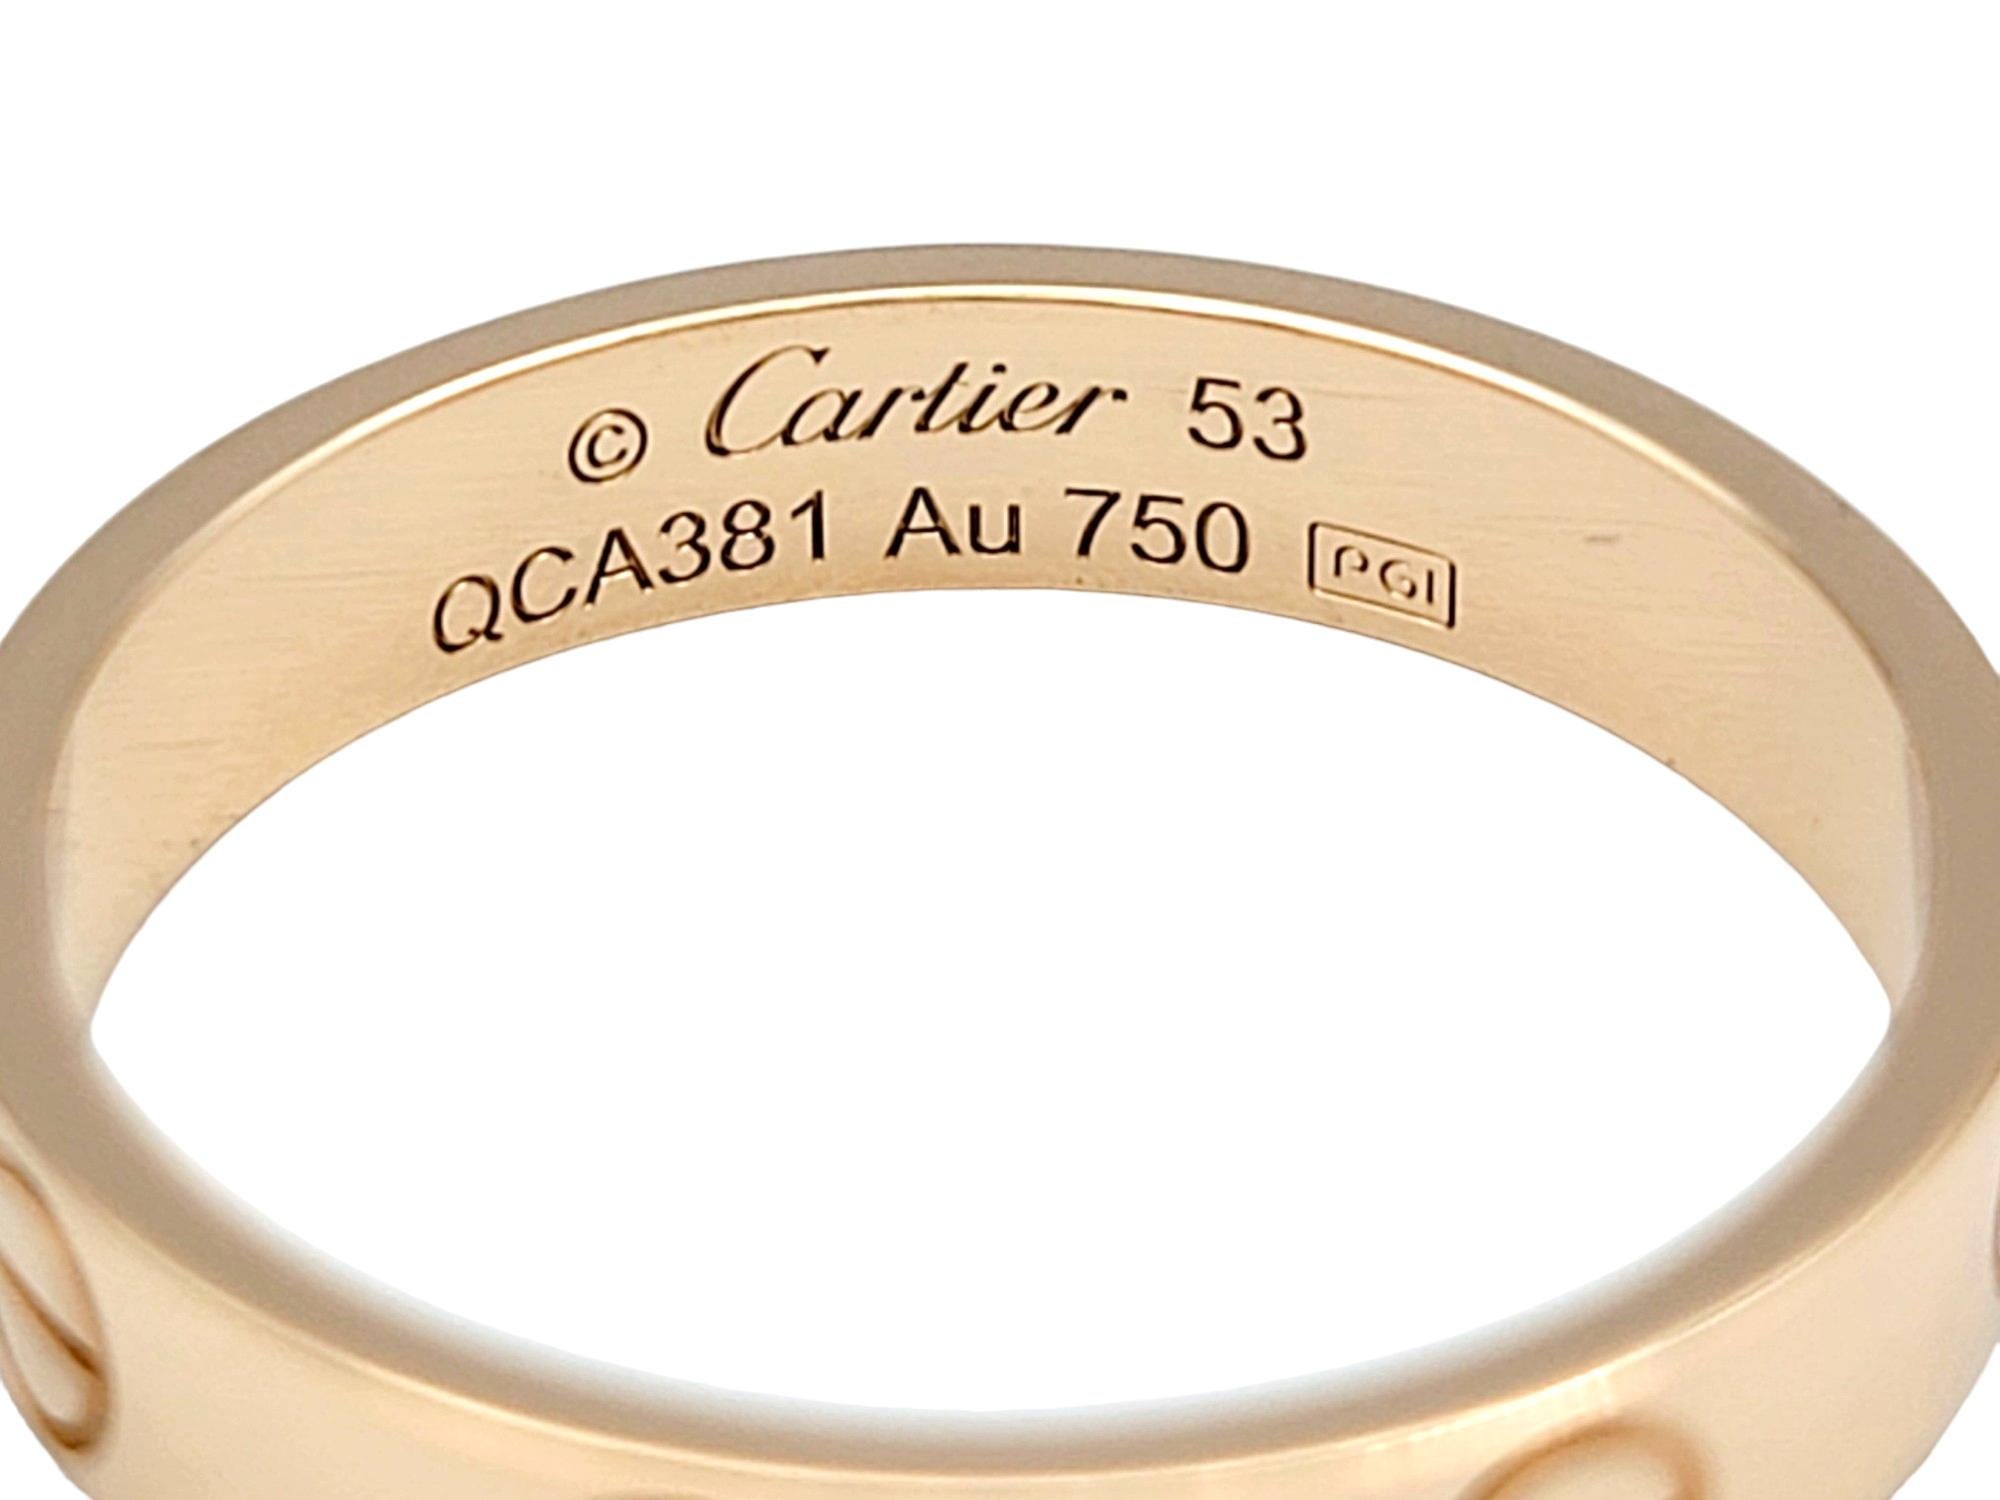 Cartier Love Collection Wedding Band Ring Set in Polished 18 Karat Rose Gold In Good Condition For Sale In Scottsdale, AZ